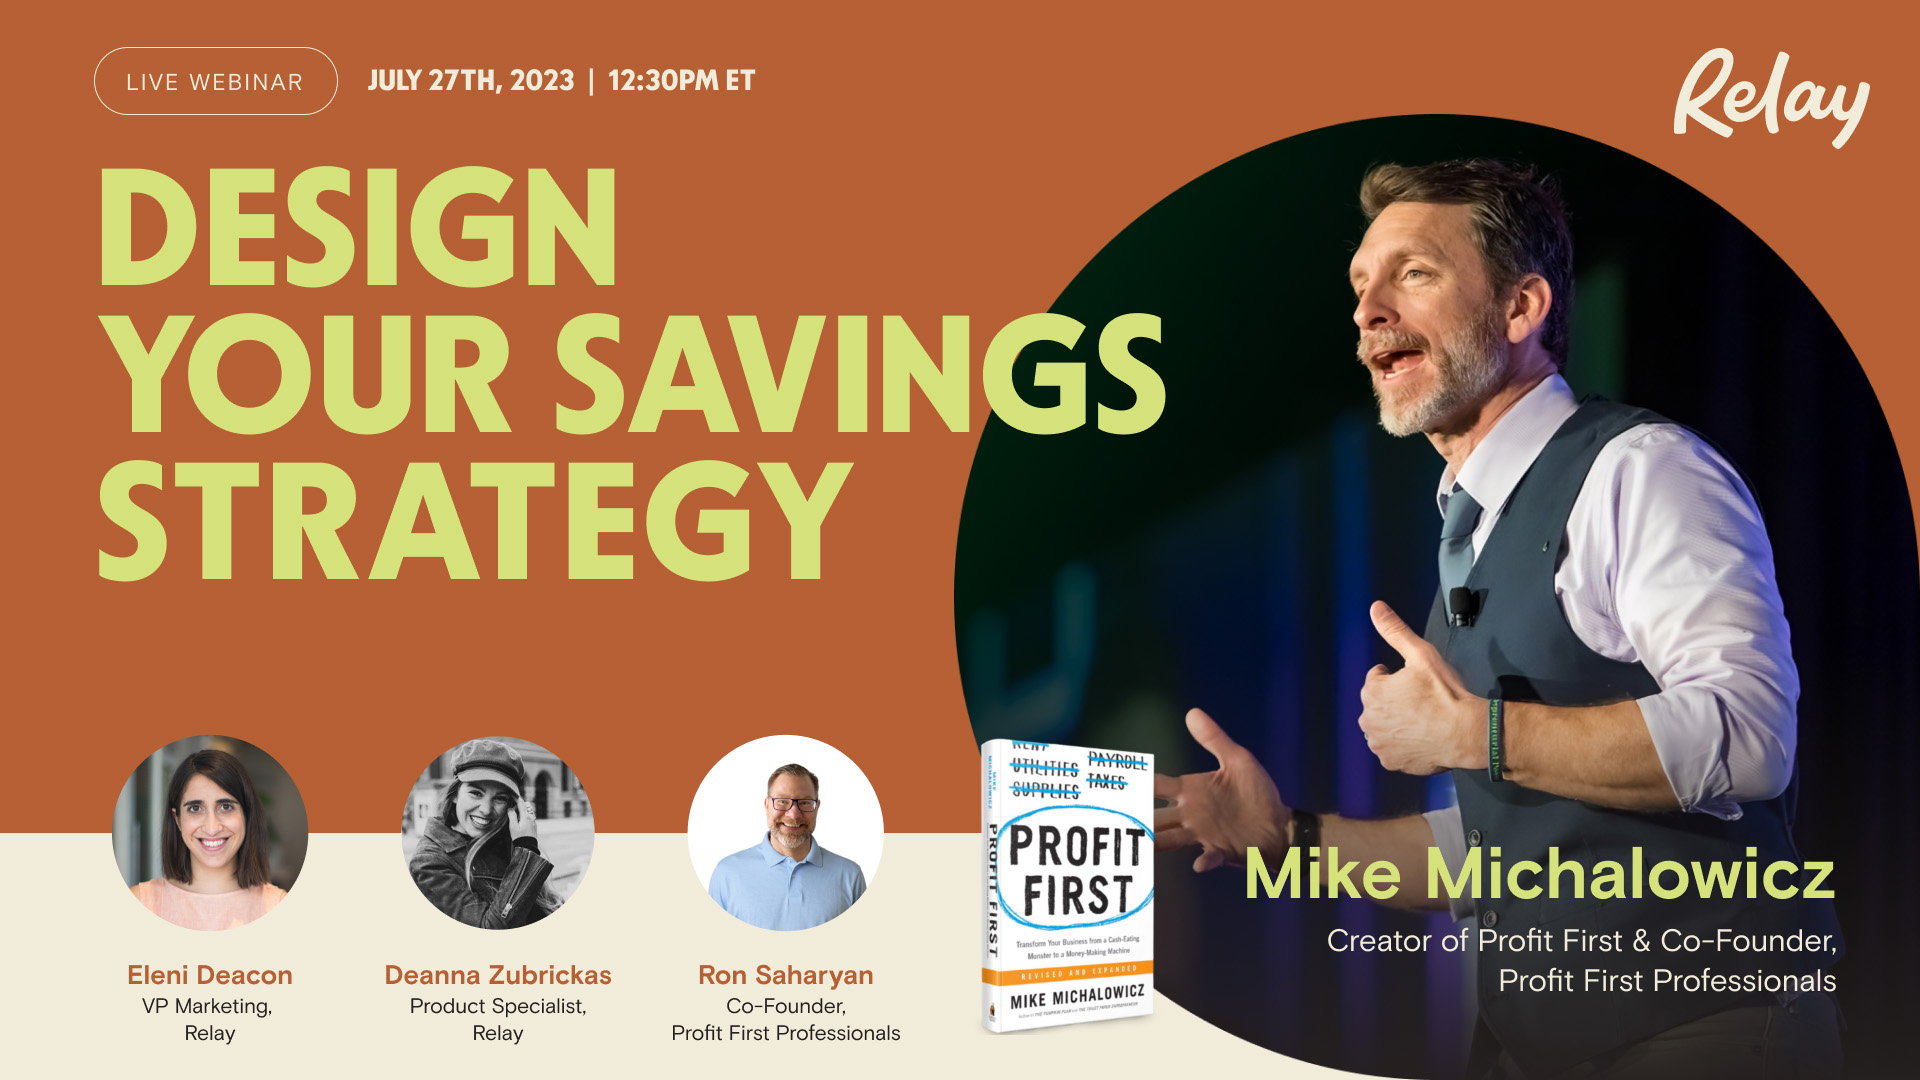 Design Your Savings Strategy — Relay Webinar with Profit First